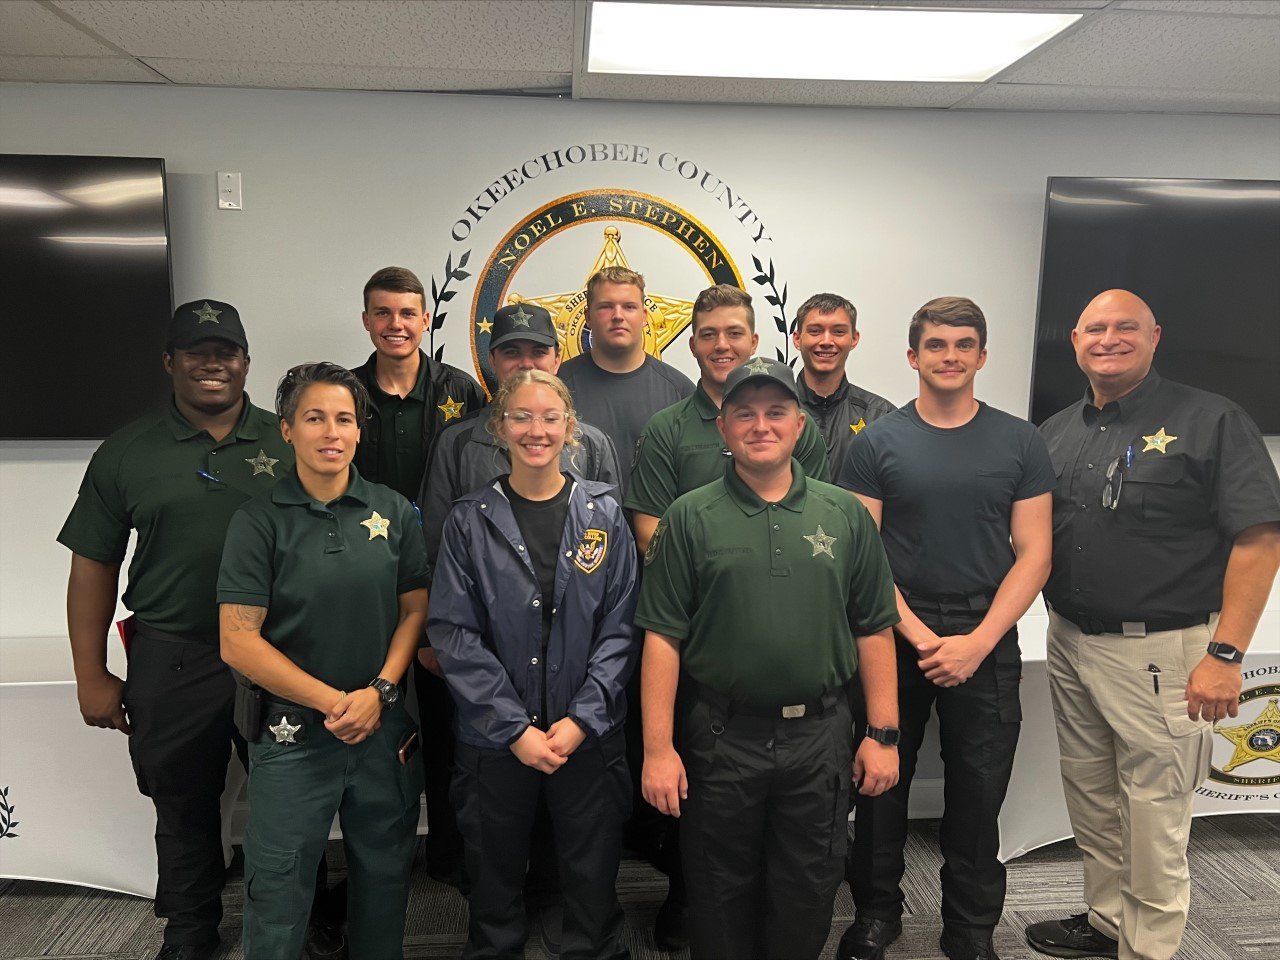 Do you remember our L.E.A.P. initiative (Law Enforcement Apprenticeship Program) for recent Okeechobee High School graduates and interested persons for corrections certification?

Here they are, our first official corrections academy participants.

Today the class came through and visited our H.Q. and saw where they could potentially work in a few months.

Pictured with them are Detention Training Coordinator Dory Sanchez and Chief Deputy Major Michael Hazellief.